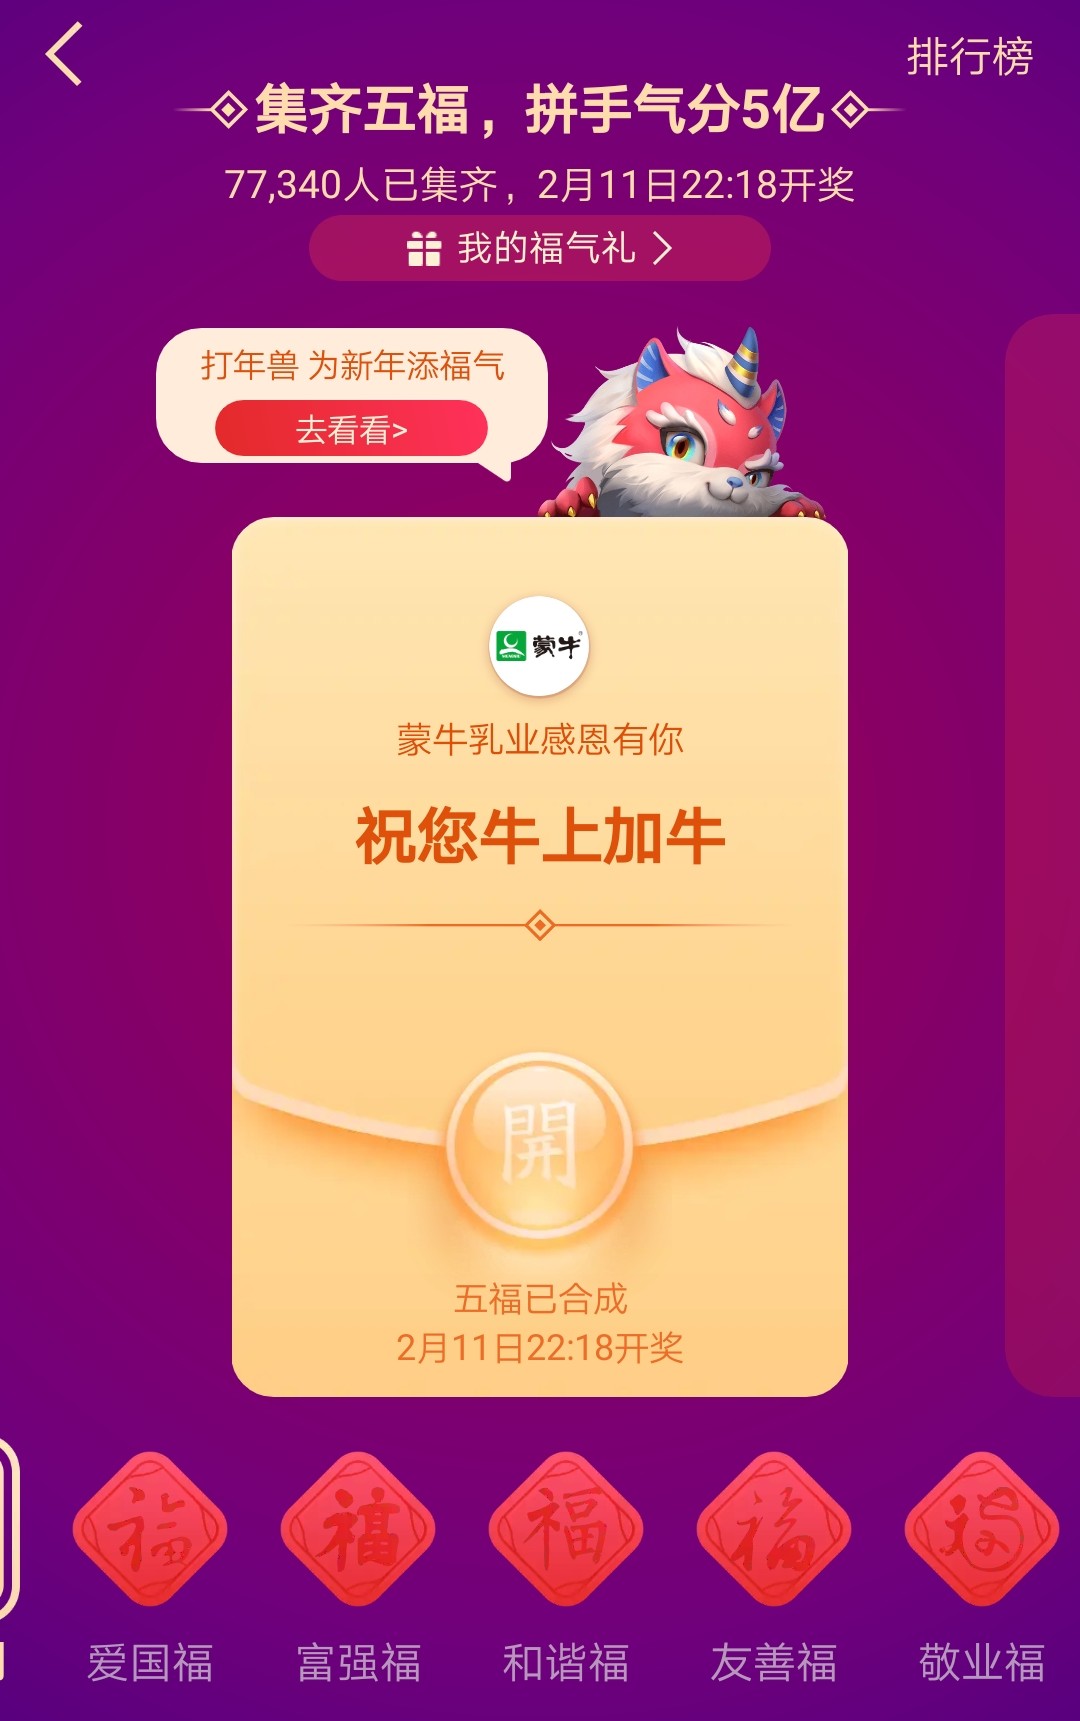 2021 oxen year pay Bao Jiqi strategy of 5 blessing activity